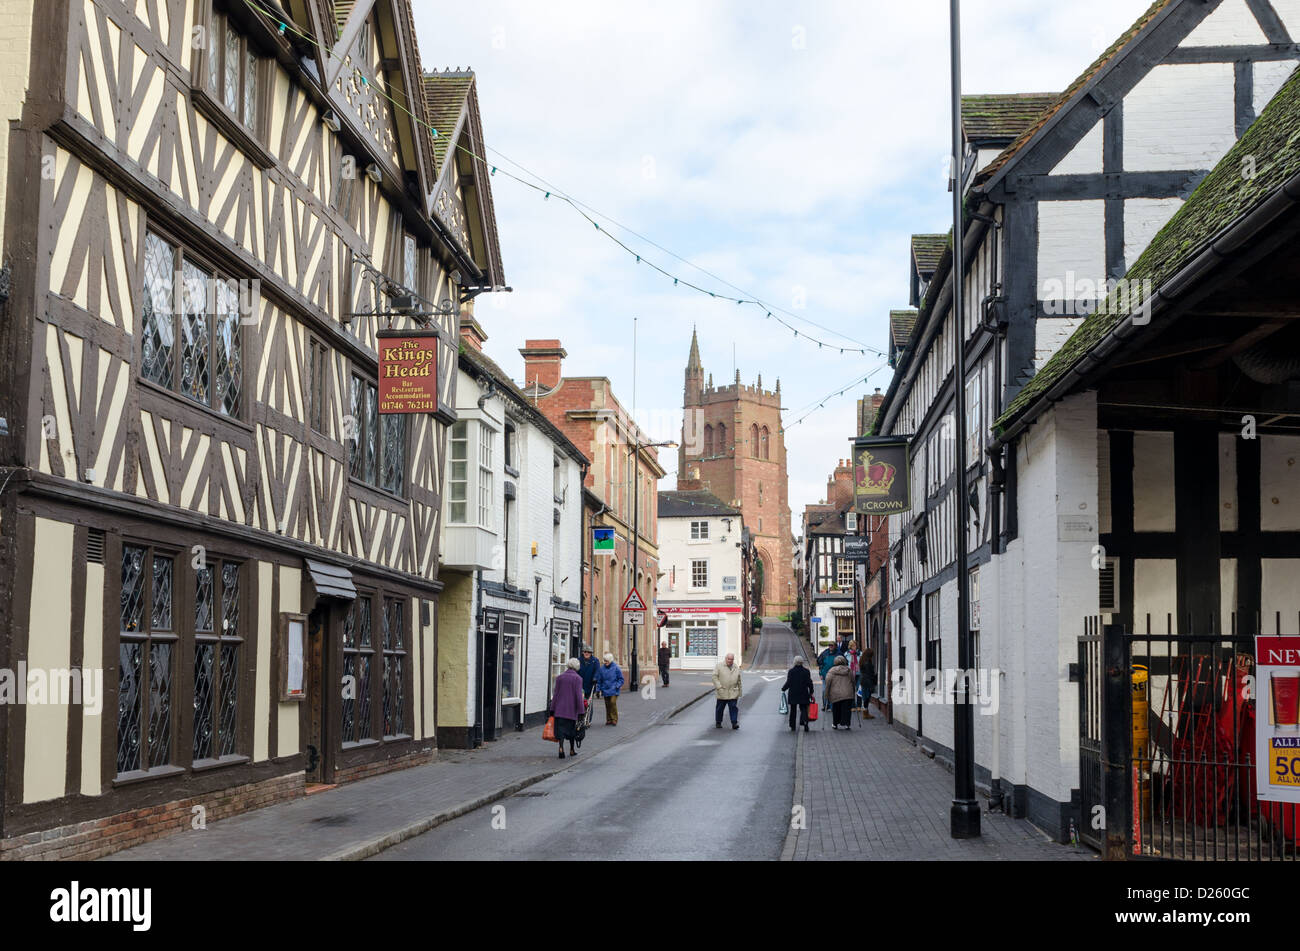 Traditional buildings including the Kings Head public house in whitburn Street, Bridgnorth, Shropshire Stock Photo